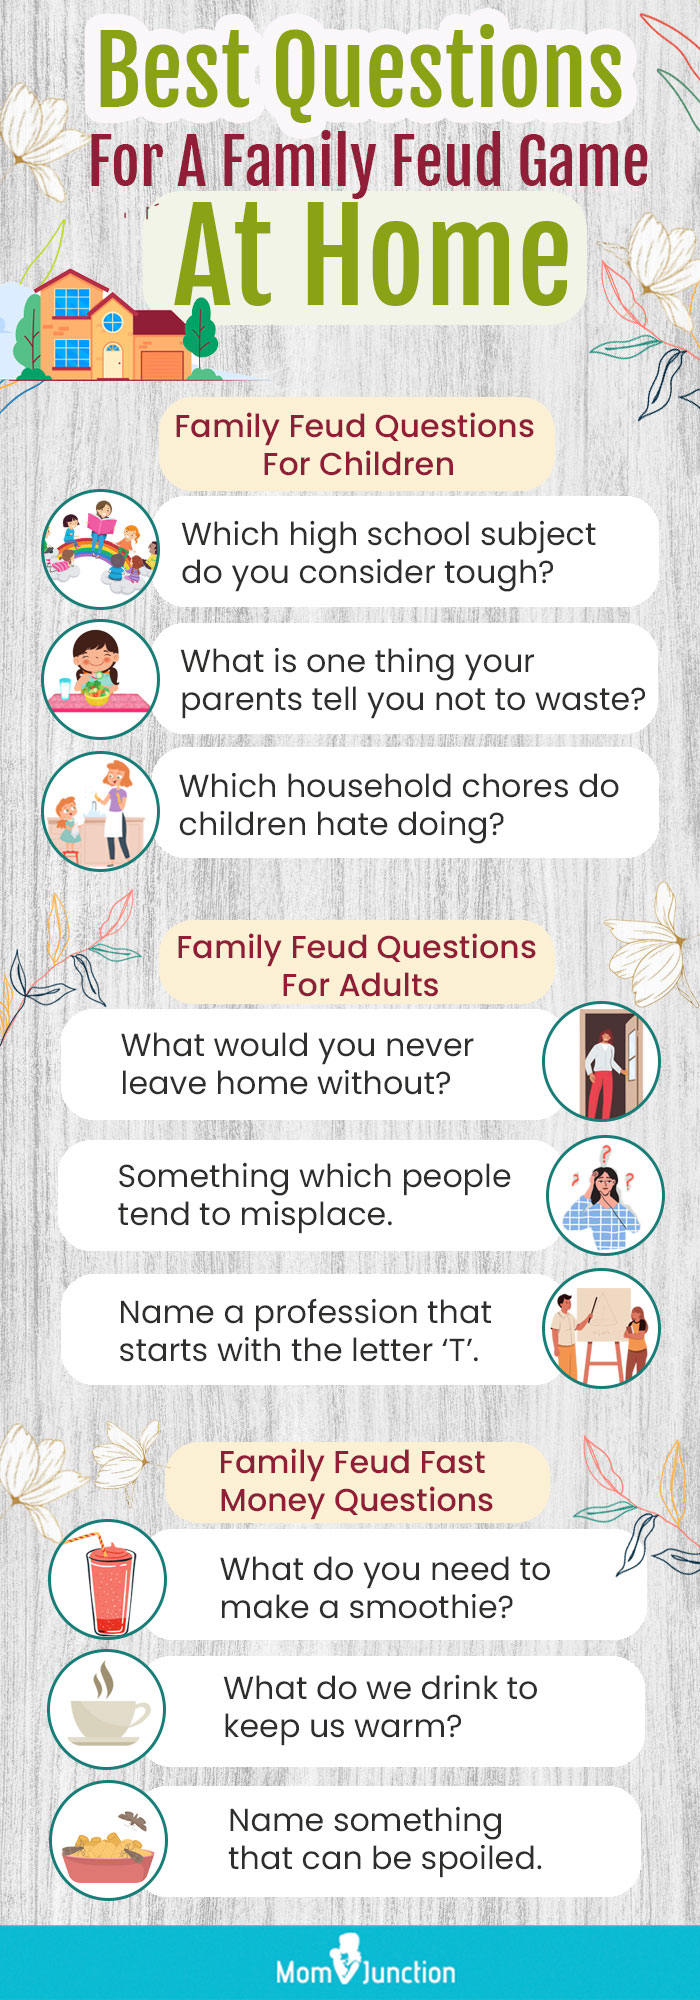 best questions for a family feud game at home (infographic)